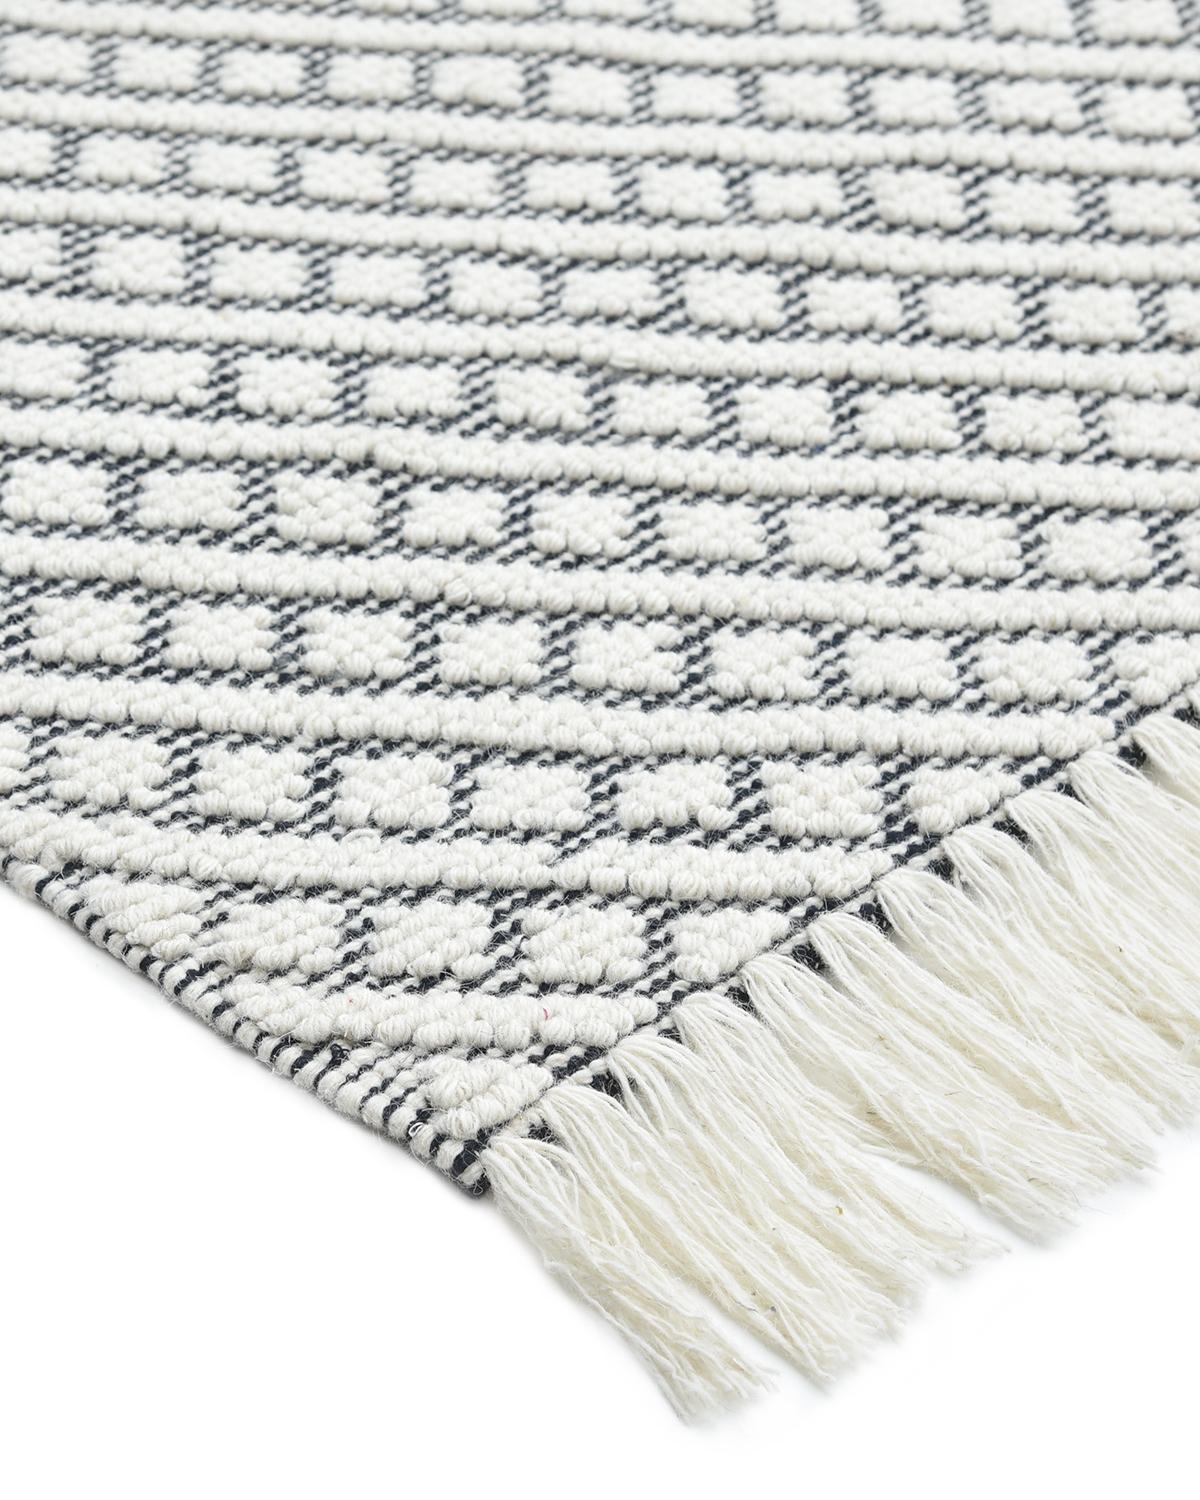 Durable and low-maintenance, flatweave rugs are especially popular for high-traffic rooms and in households with children and pets. The handwoven rugs in the Flatweave collection are beautiful as well as practical. Their quiet patterns and